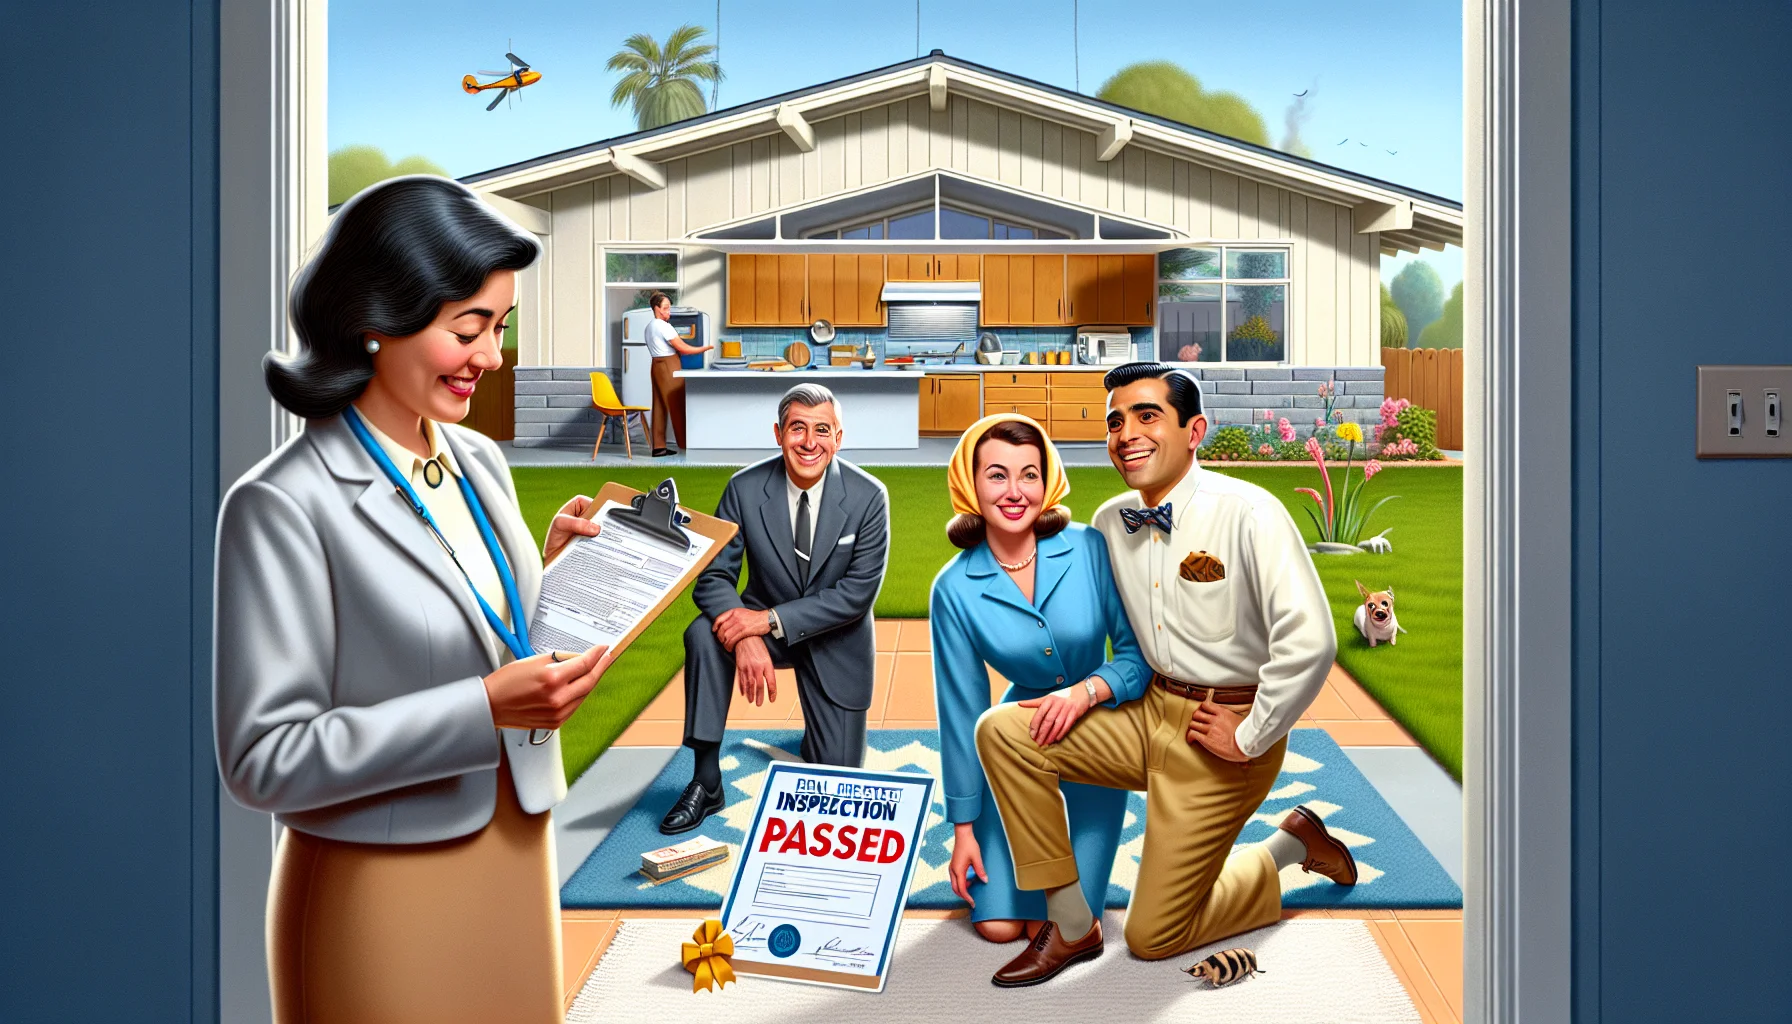 Design an amusing and realistic scenario featuring a real-estate home inspection. The inspector, a professional South-Asian woman, is examining the pristine condition of a mid-century style house. The homeowners are a jovial Middle-Eastern man and a cheerful Hispanic woman, showcasing their well-maintained home with pride. The house should feature indicative elements of a perfect real estate - sparkling clean kitchen, not a crack in the walls or ceiling, a lush green front yard, and a cozy fireplace in the living room. A humorous detail could be a clean white rug with a new 'inspection passed' certificate placed on it with a bow. Everything indicates an absolute real estate dream!